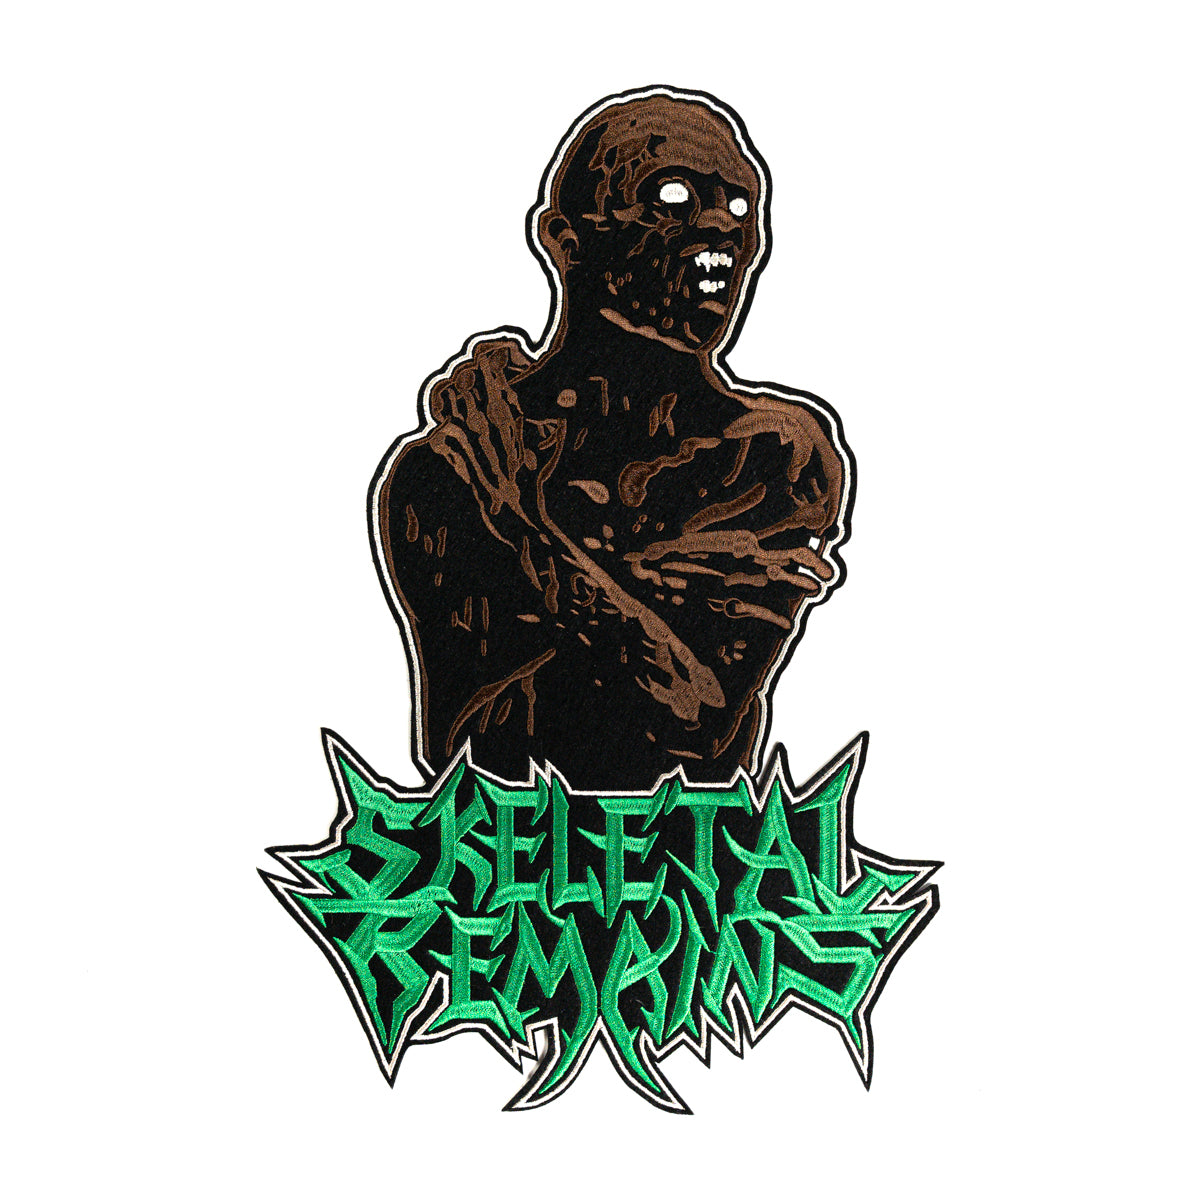 SKELETAL REMAINS "Beyond The Flesh" Backpatch